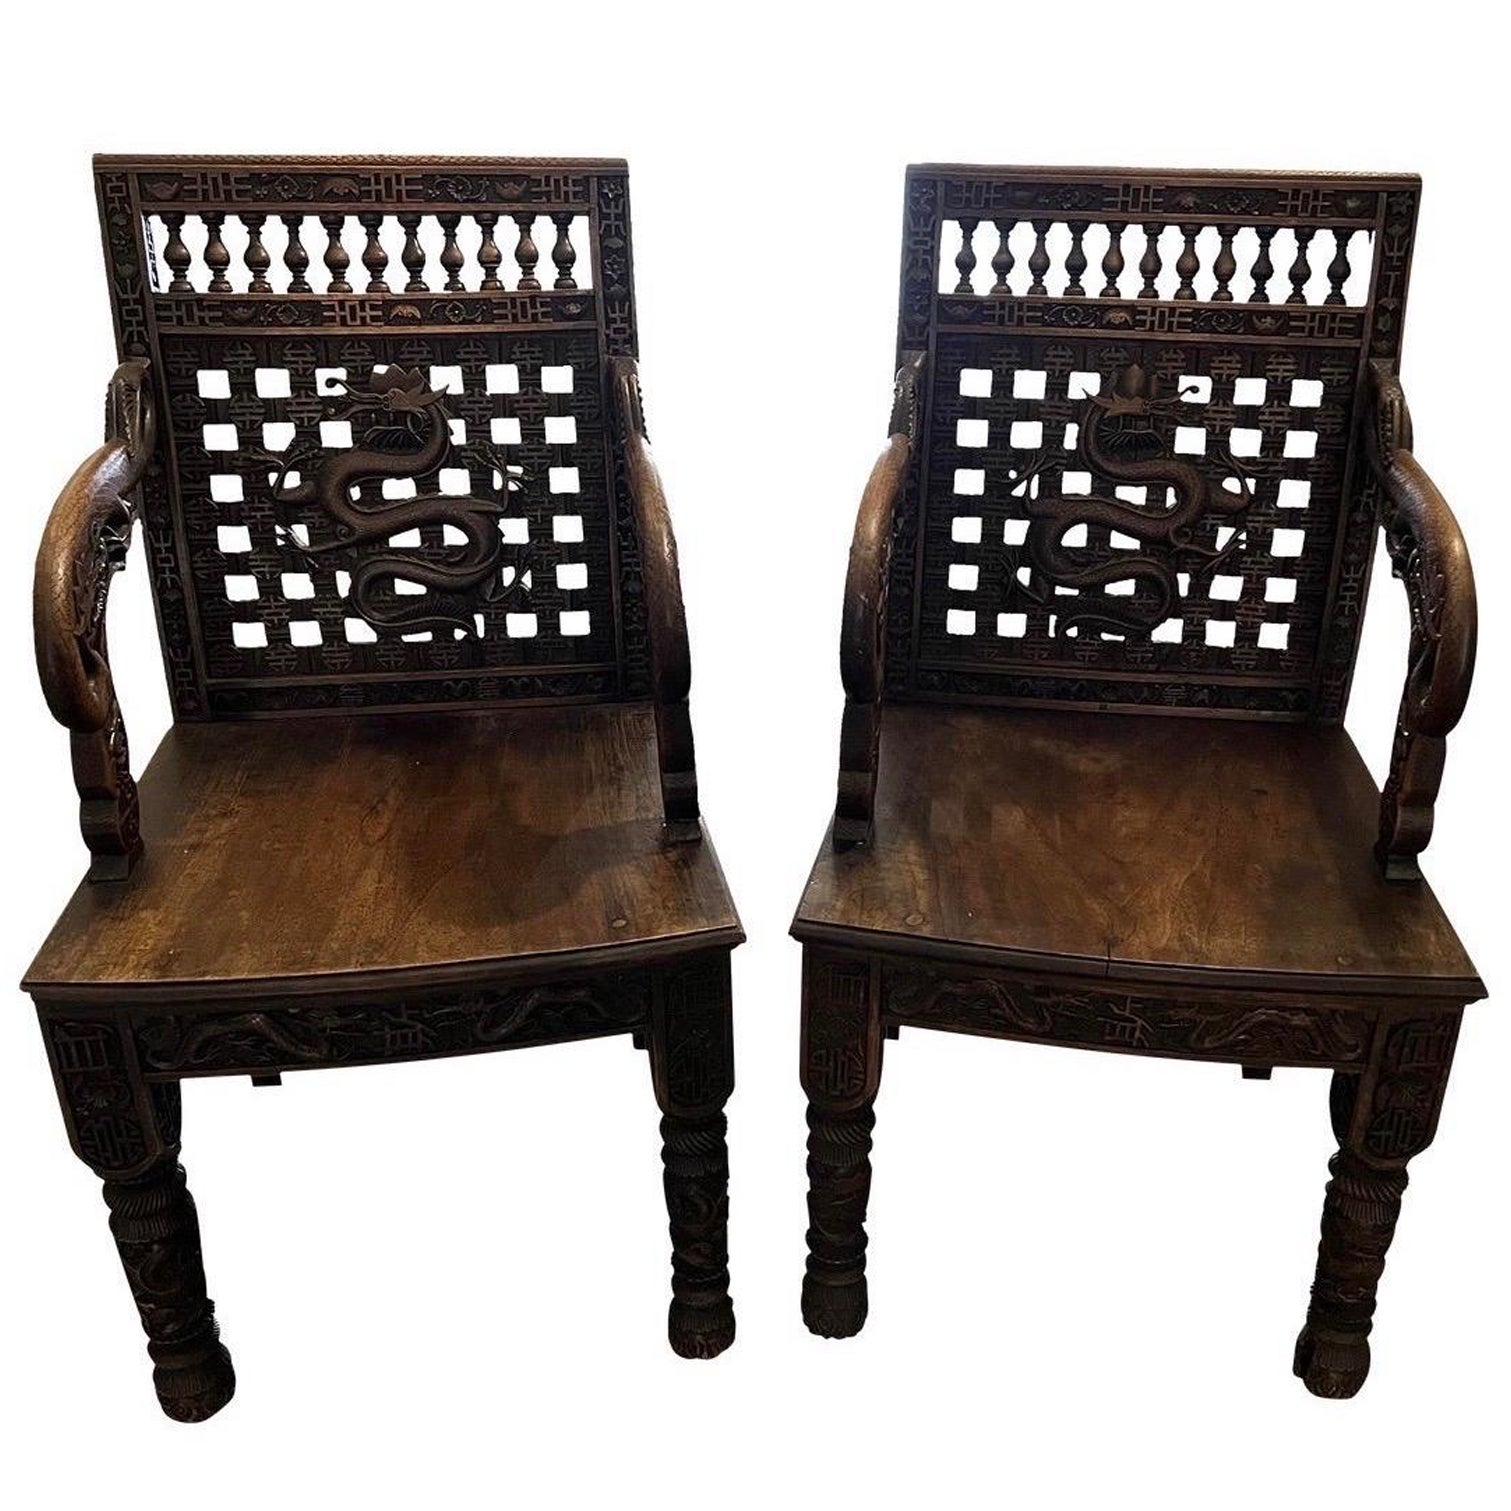 19th Century, Antique Carved Chinese Dragon and Symbolic Armchairs, Pair For Sale